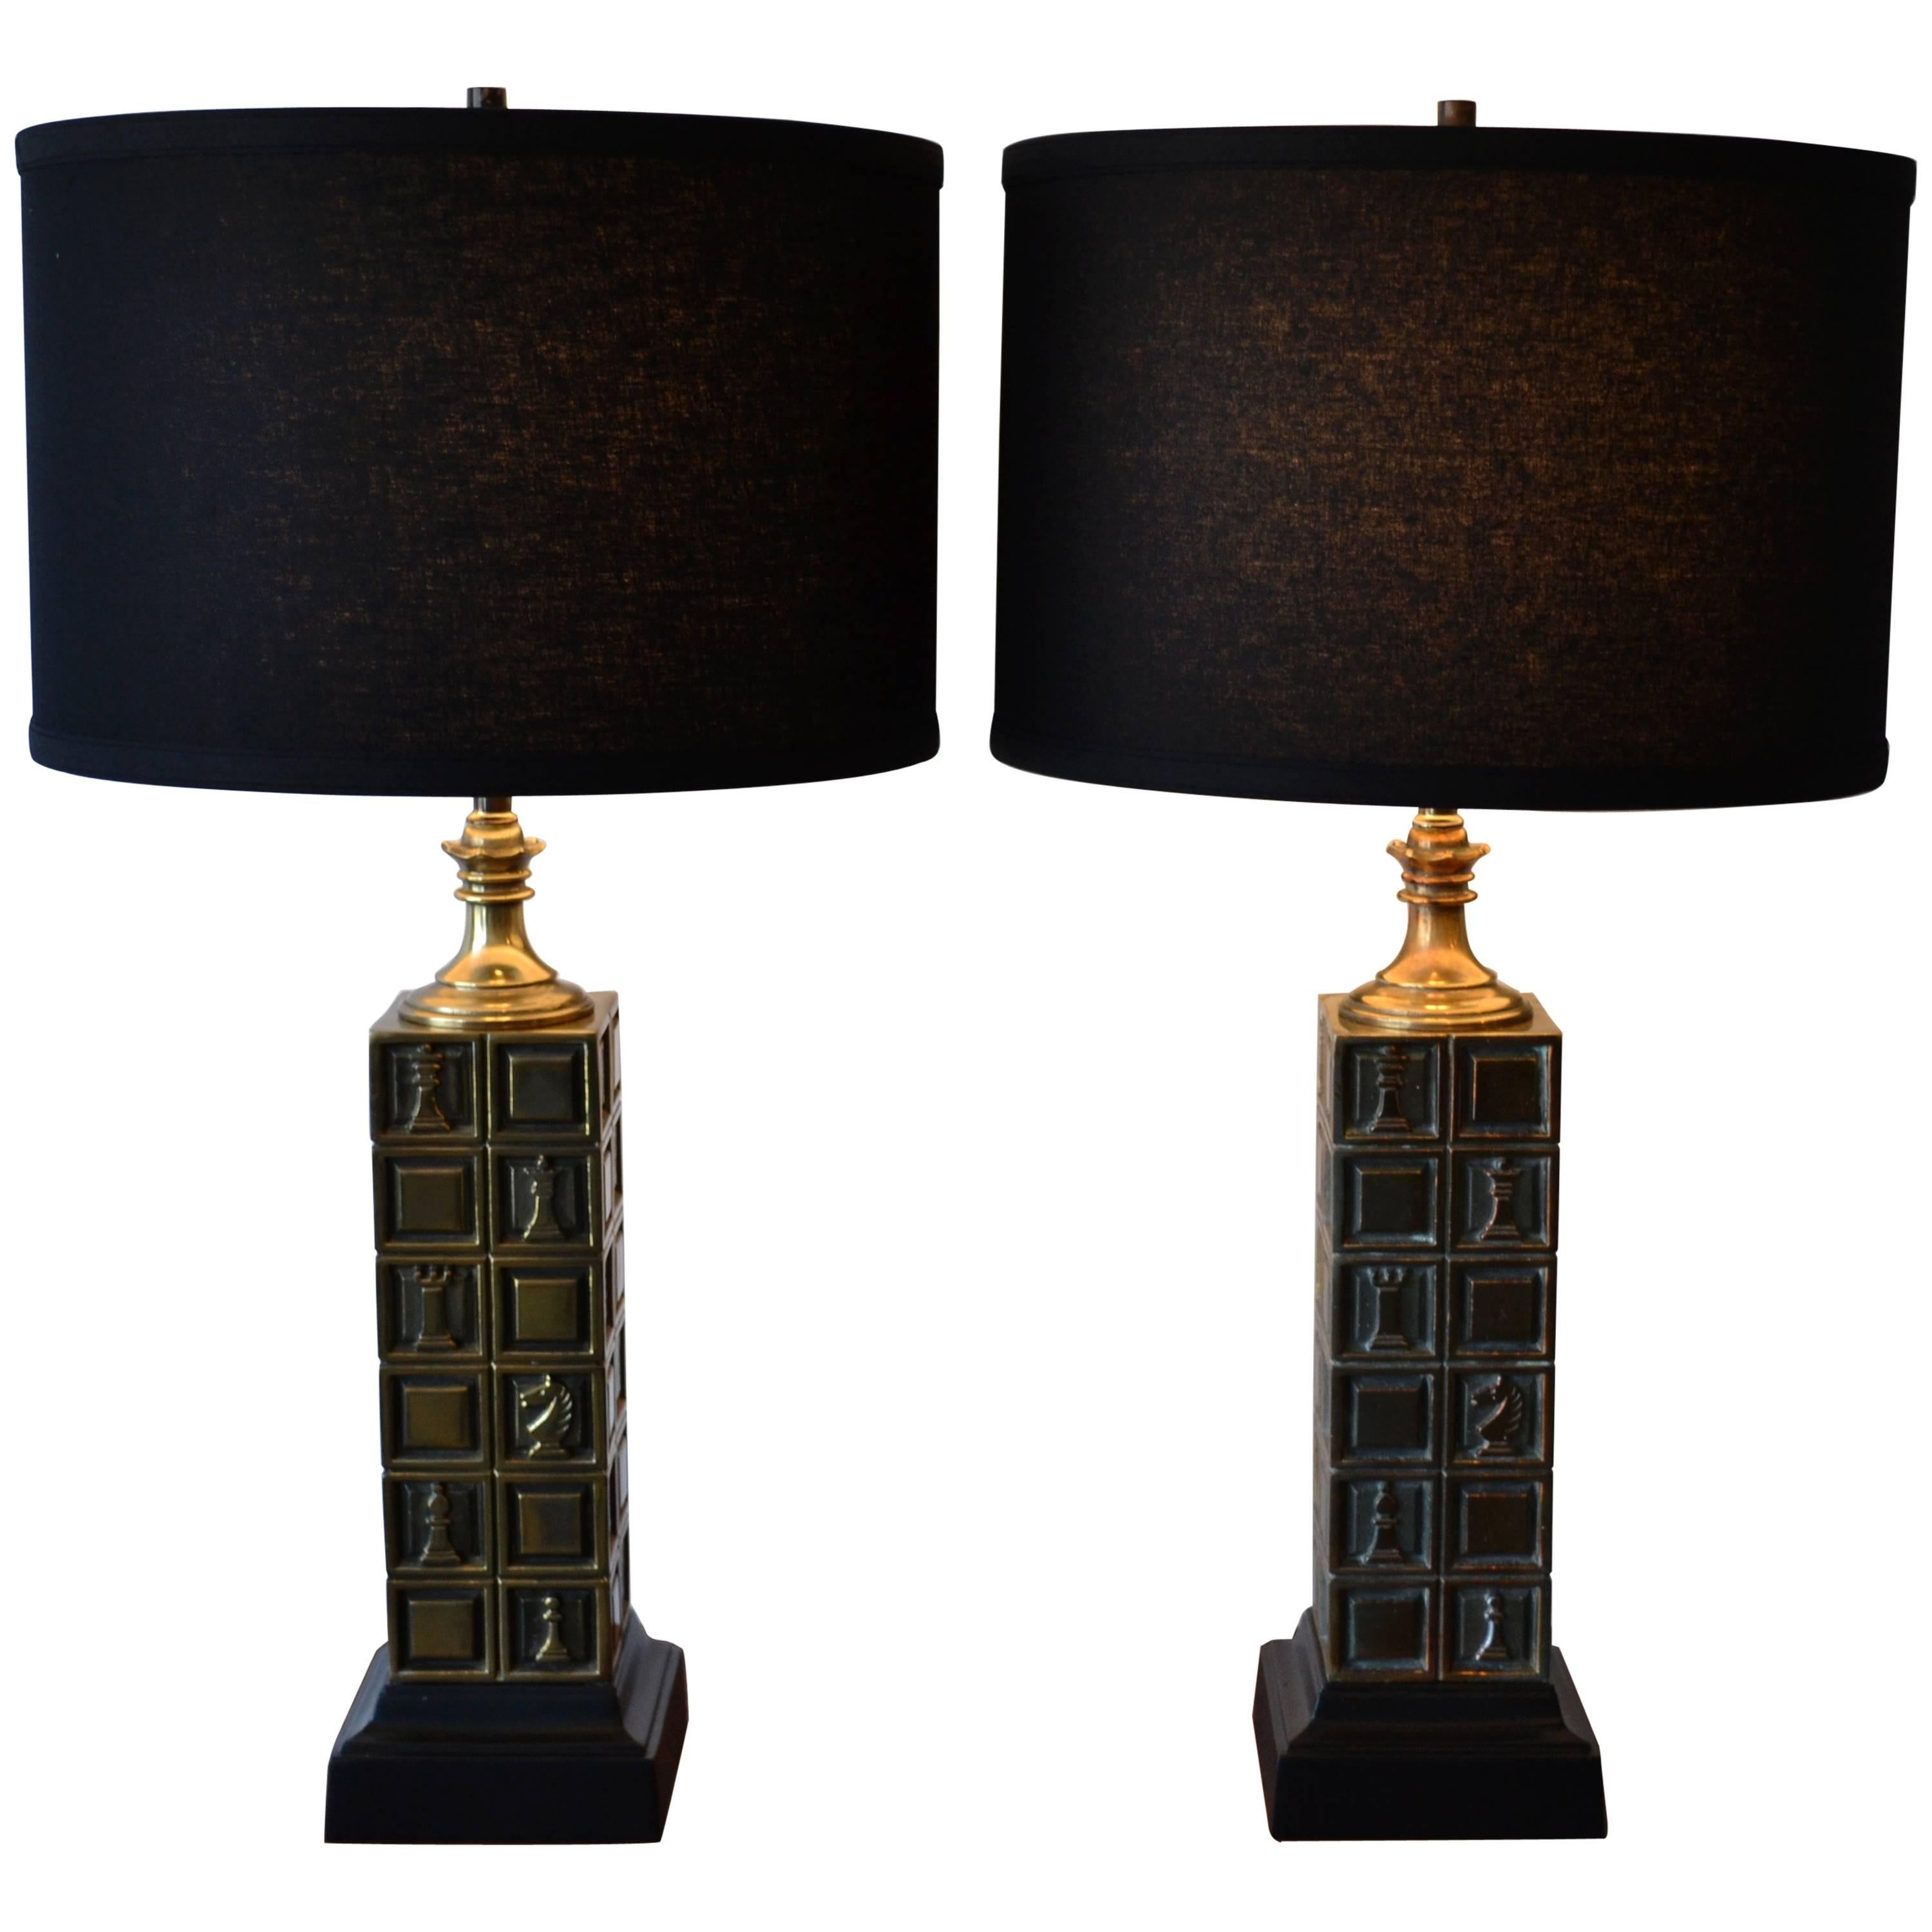 Pair of Brass Chess Piece Table Lamps by Laurel, 1950s